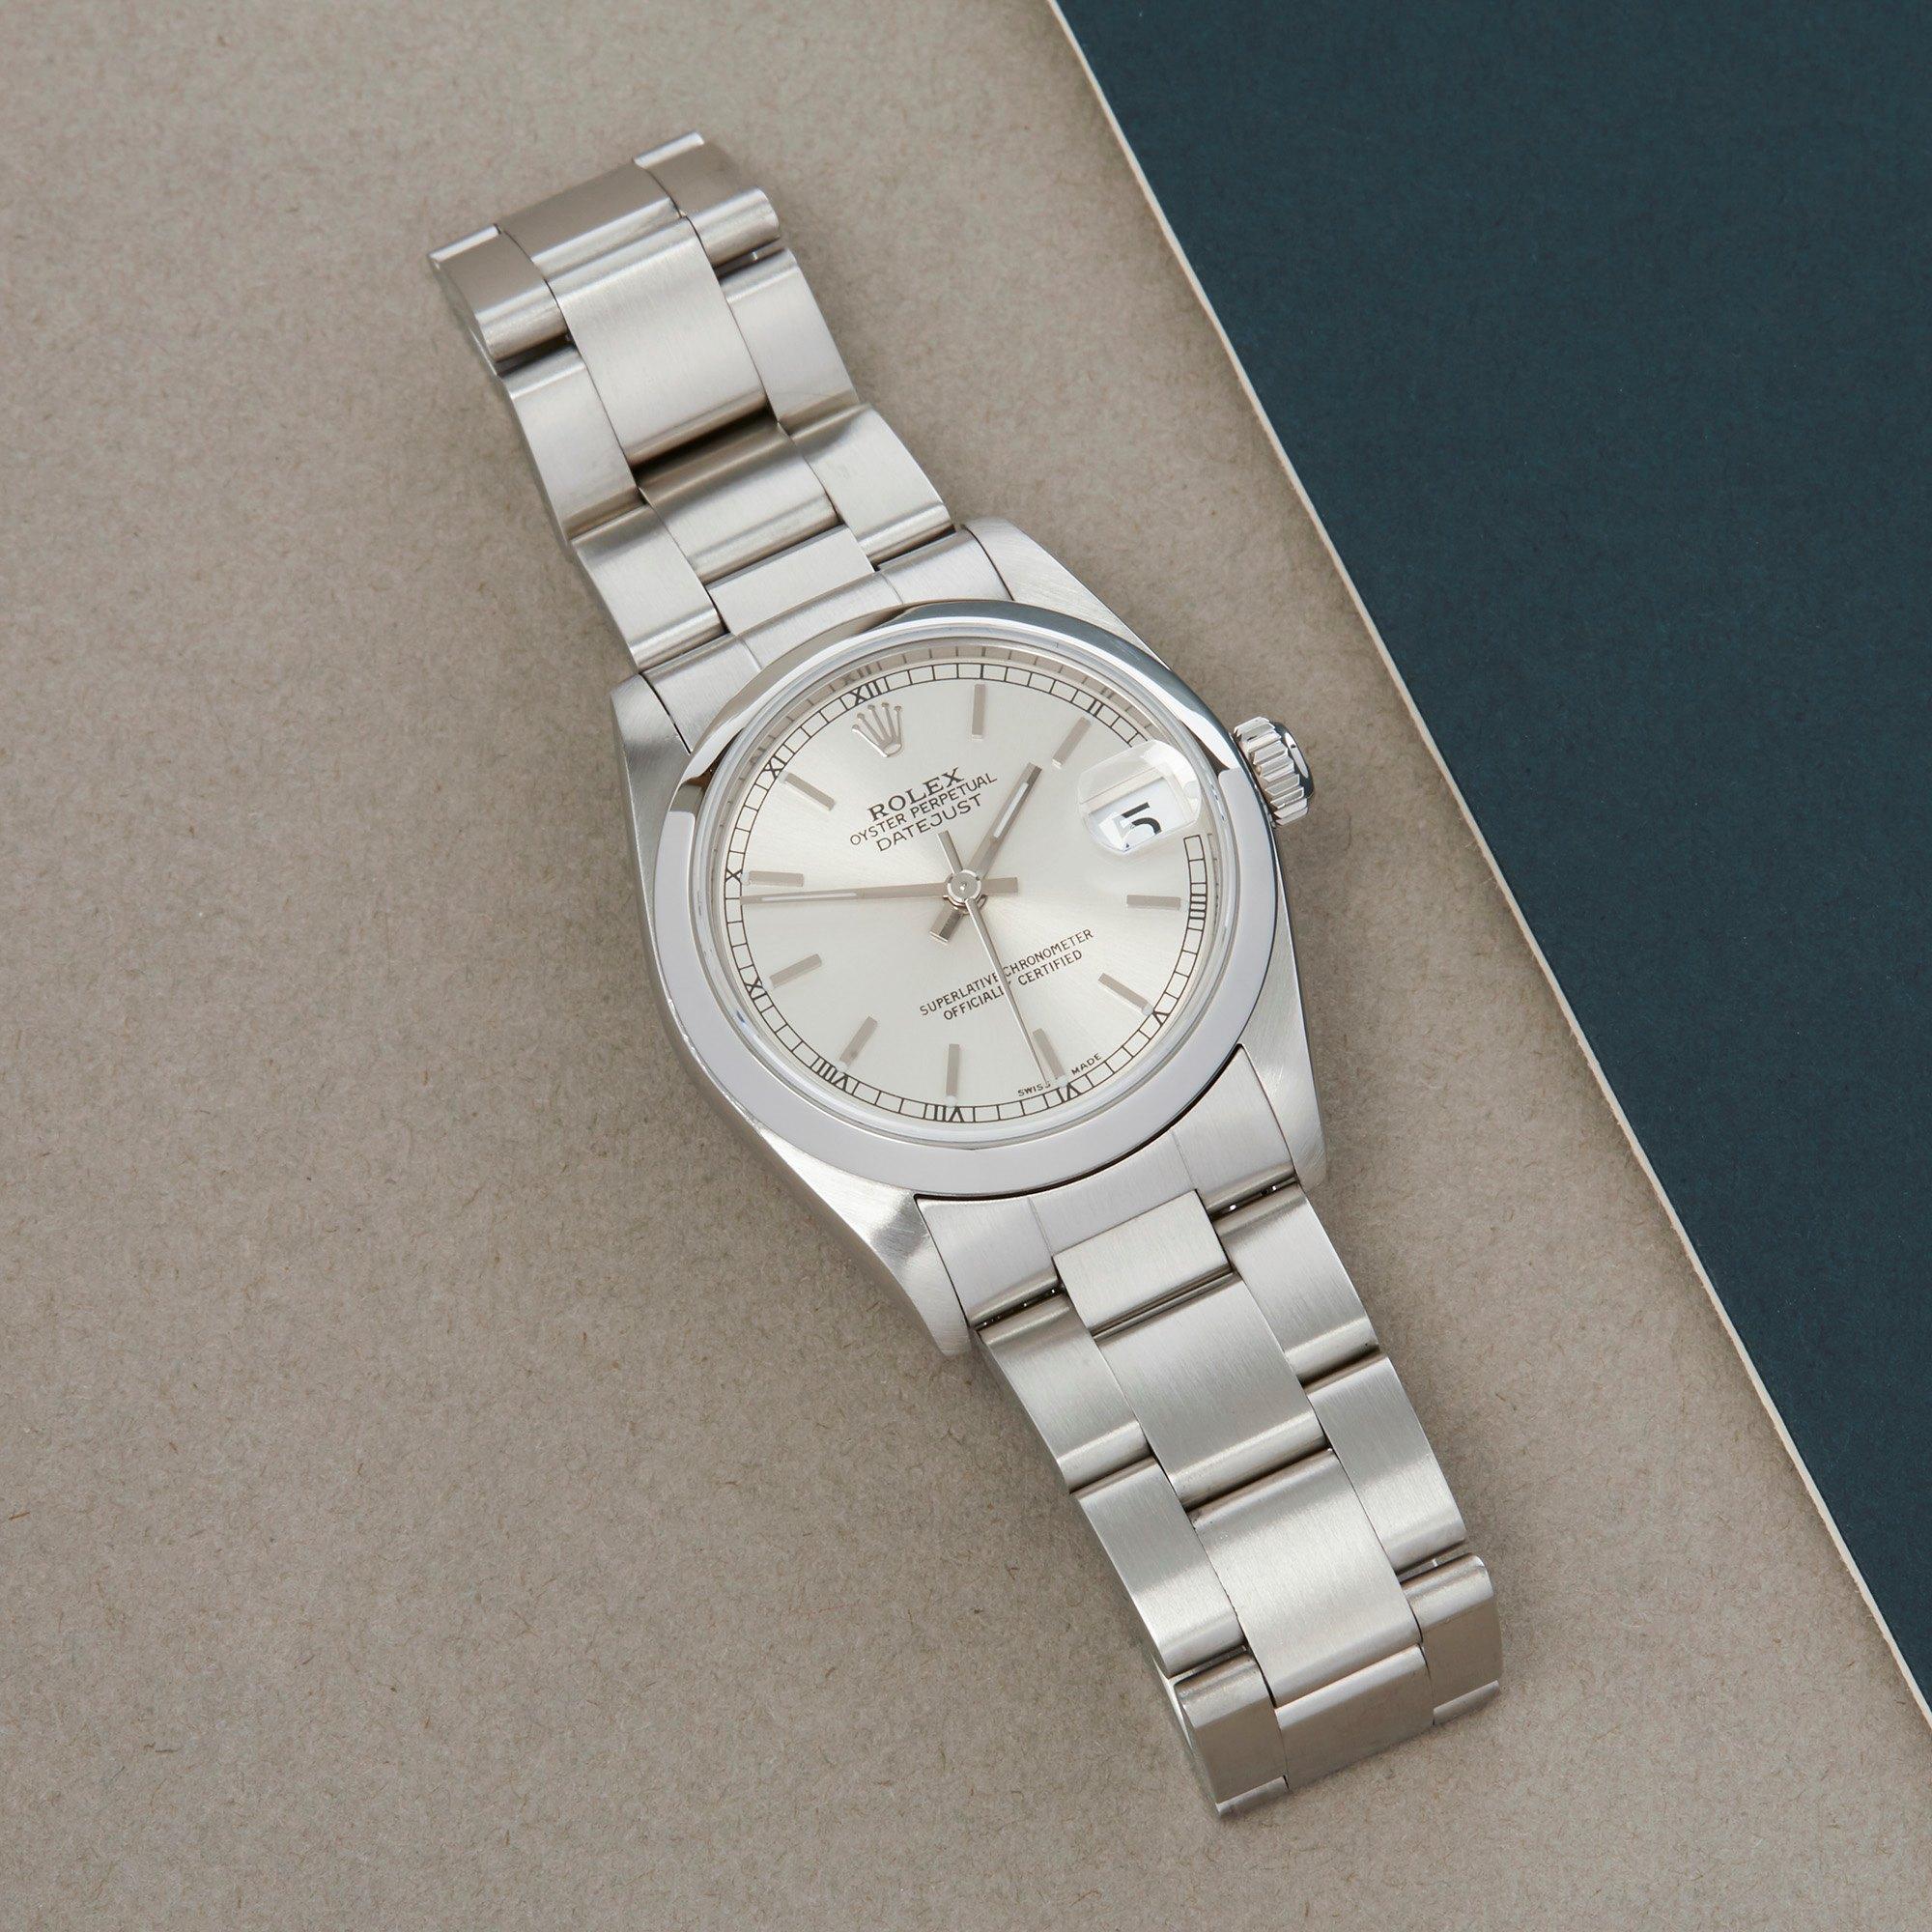 Xupes Reference: W007573
Manufacturer: Rolex
Model: Datejust
Model Variant: 31
Model Number: 78240
Age: 2000
Gender: Ladies
Complete With: Rolex Box 
Dial: Silver Baton
Glass: Sapphire Crystal
Case Size: 31mm
Case Material: Stainless Steel
Strap